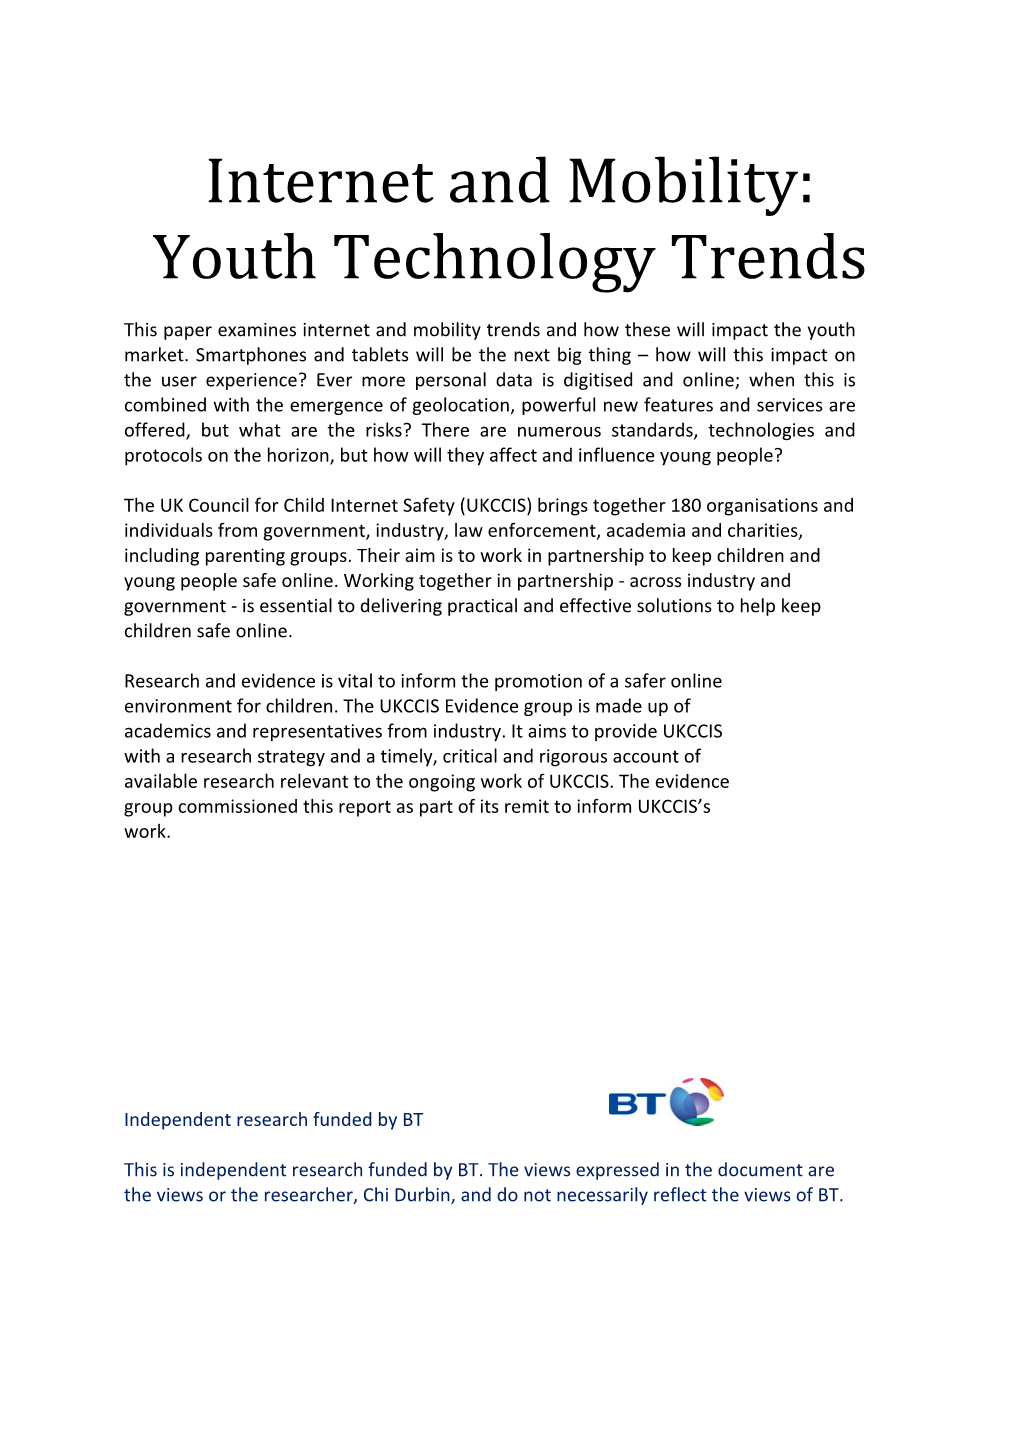 Internet and Mobility: Youth Technology Trends